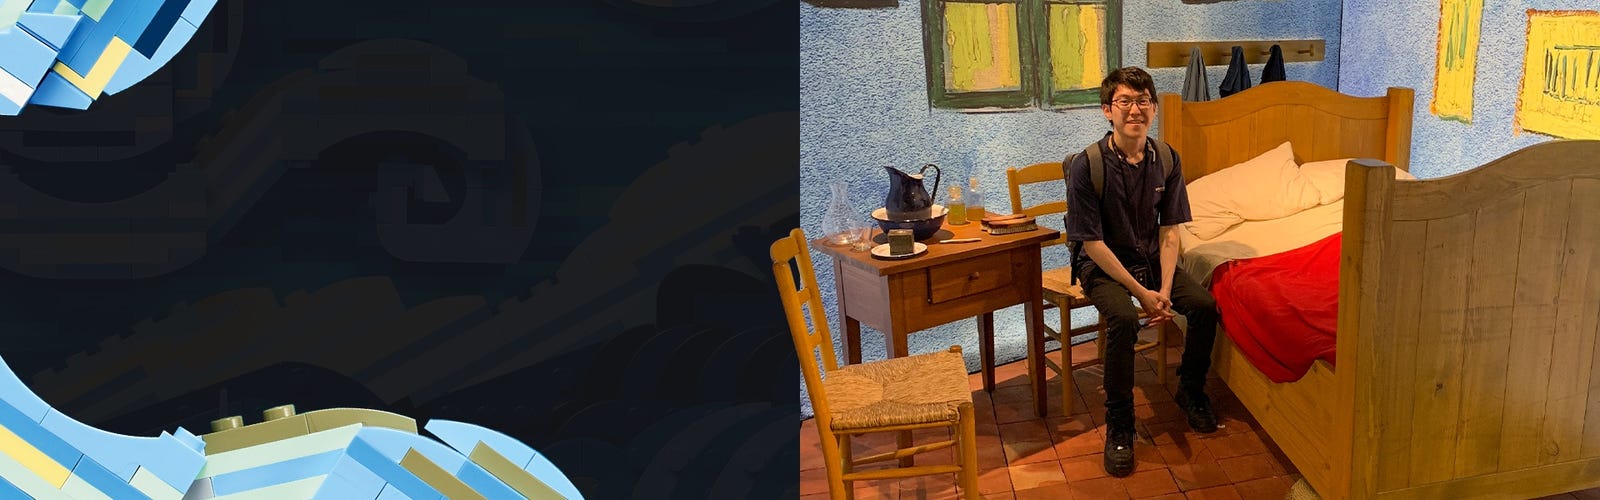 Vincent van Gogh's The Starry Night LEGO Set dropping soon with stunning  details - Yanko Design